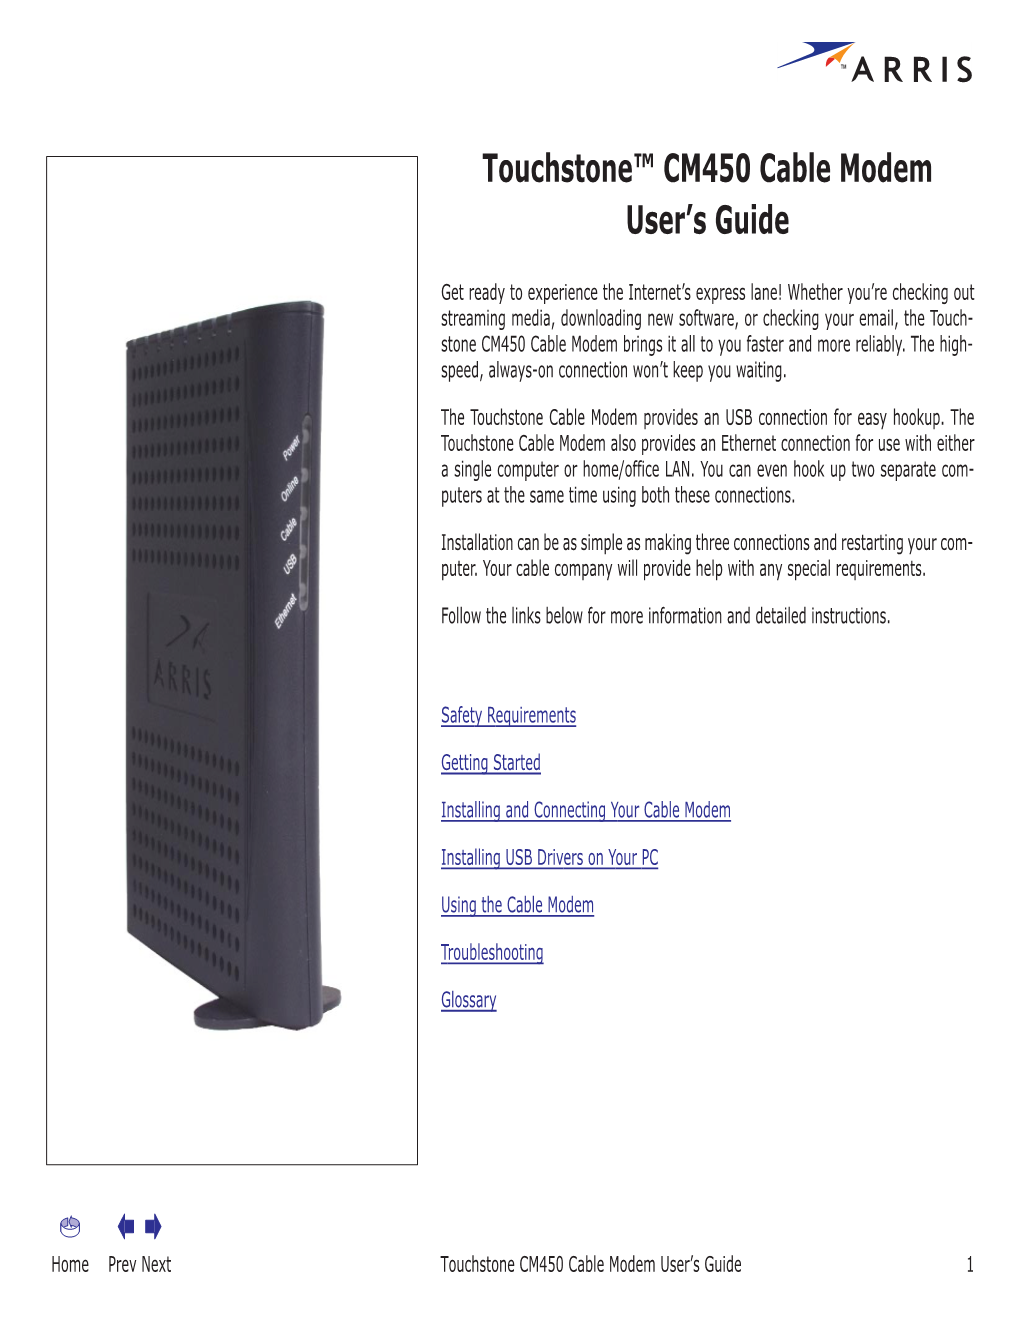 Touchstone CM450 Cable Modem User's Guide